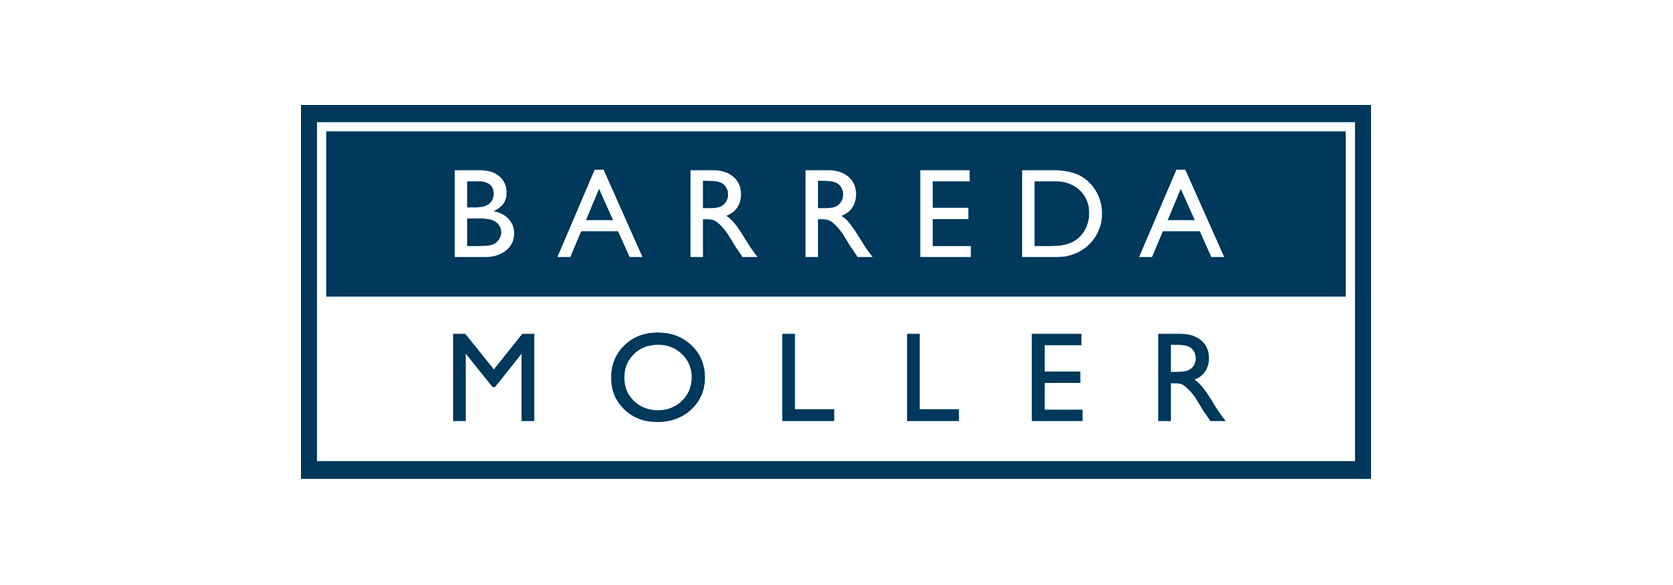 Barreda Moller, based in Peru, is an affiliate of Taberer Attorneys